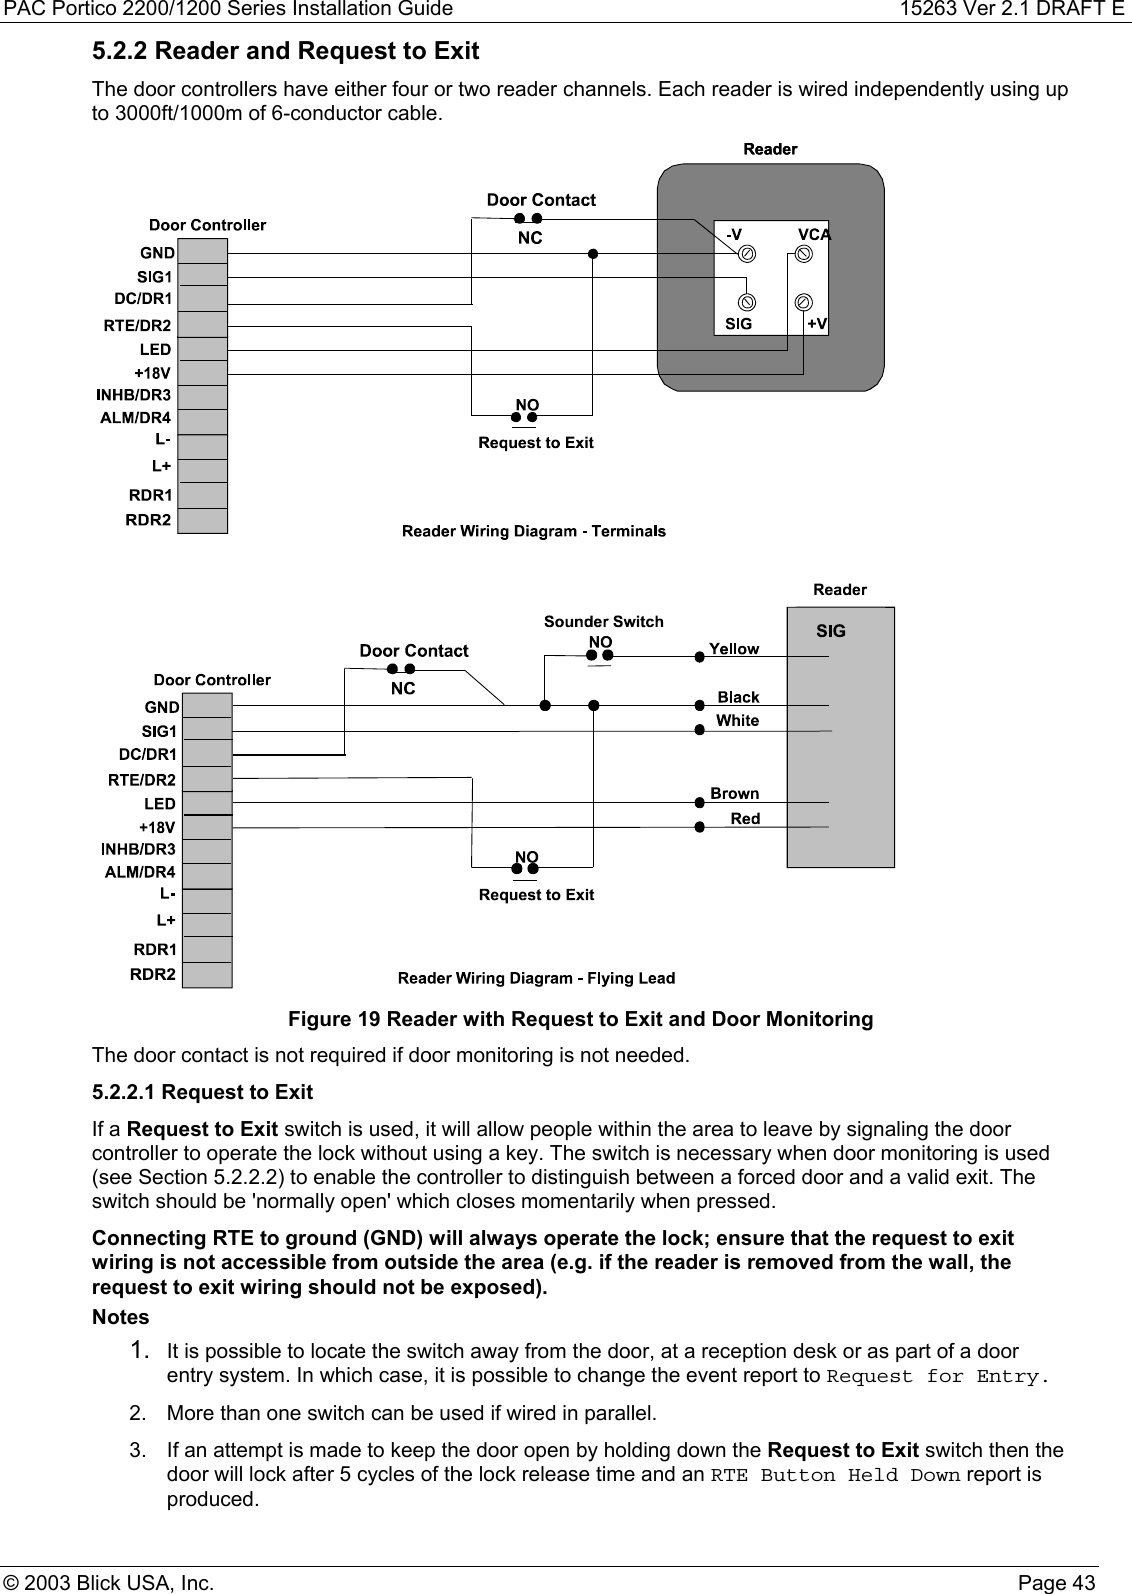 PAC Portico 2200/1200 Series Installation Guide 15263 Ver 2.1 DRAFT E© 2003 Blick USA, Inc. Page 435.2.2 Reader and Request to ExitThe door controllers have either four or two reader channels. Each reader is wired independently using upto 3000ft/1000m of 6-conductor cable.Figure 19 Reader with Request to Exit and Door MonitoringThe door contact is not required if door monitoring is not needed.5.2.2.1 Request to ExitIf a Request to Exit switch is used, it will allow people within the area to leave by signaling the doorcontroller to operate the lock without using a key. The switch is necessary when door monitoring is used(see Section 5.2.2.2) to enable the controller to distinguish between a forced door and a valid exit. Theswitch should be &apos;normally open&apos; which closes momentarily when pressed.Connecting RTE to ground (GND) will always operate the lock; ensure that the request to exitwiring is not accessible from outside the area (e.g. if the reader is removed from the wall, therequest to exit wiring should not be exposed).Notes1.  It is possible to locate the switch away from the door, at a reception desk or as part of a doorentry system. In which case, it is possible to change the event report to Request for Entry.2.  More than one switch can be used if wired in parallel.3.  If an attempt is made to keep the door open by holding down the Request to Exit switch then thedoor will lock after 5 cycles of the lock release time and an RTE Button Held Down report isproduced.